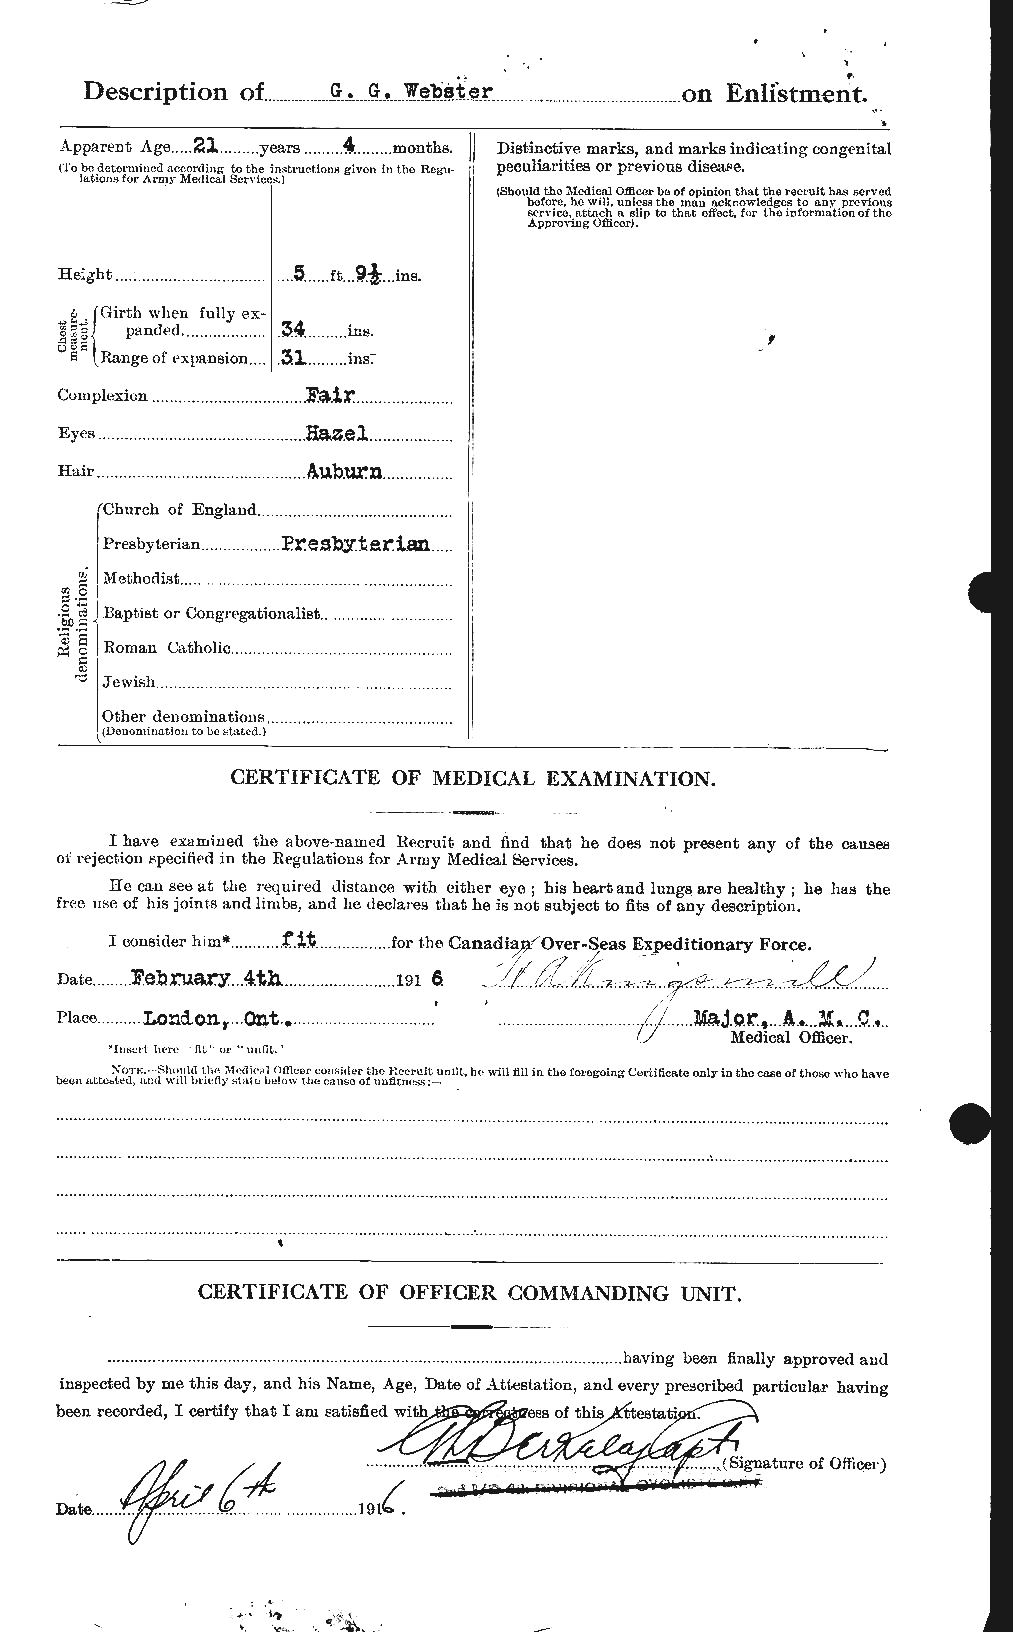 Personnel Records of the First World War - CEF 670398b